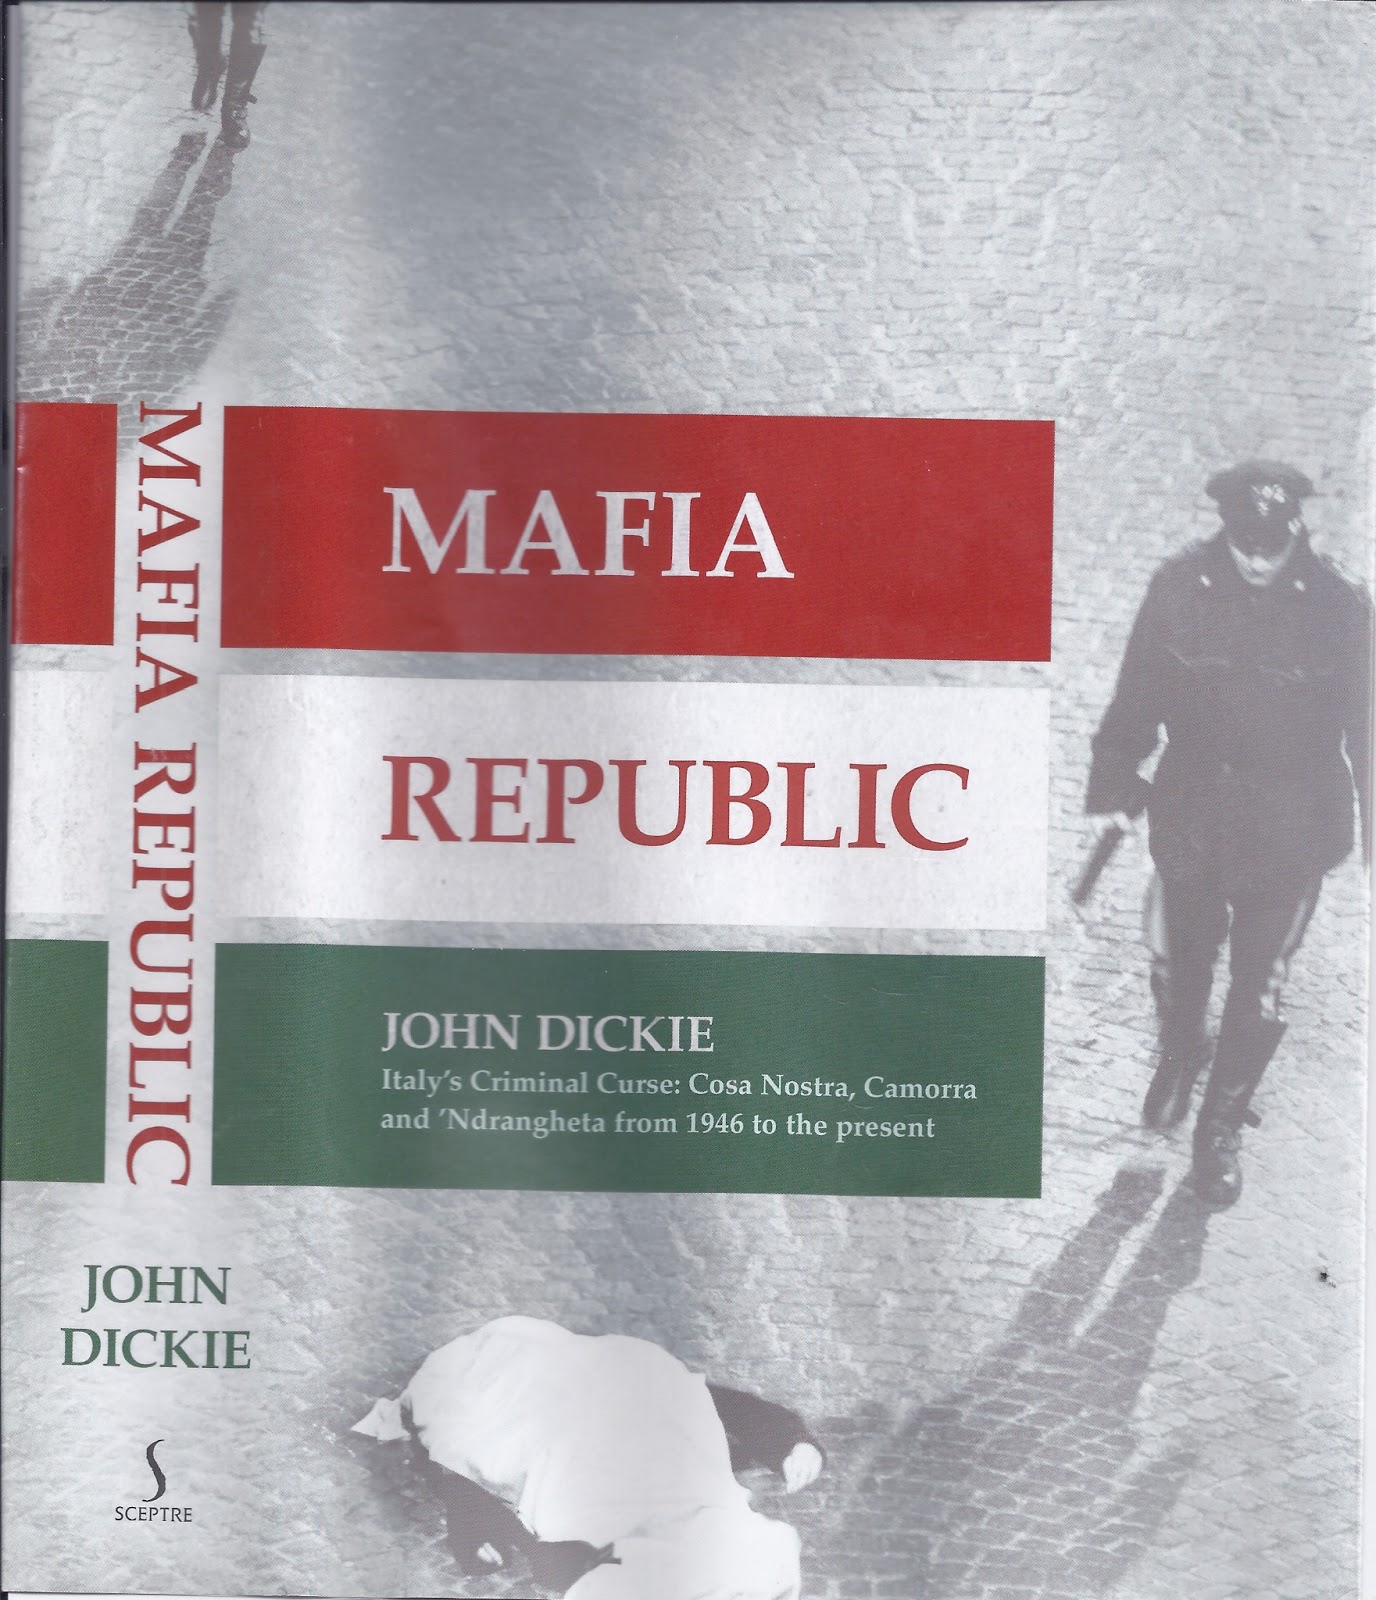 This Cover to Cover ...: Review: John Dickie,Mafia Republic